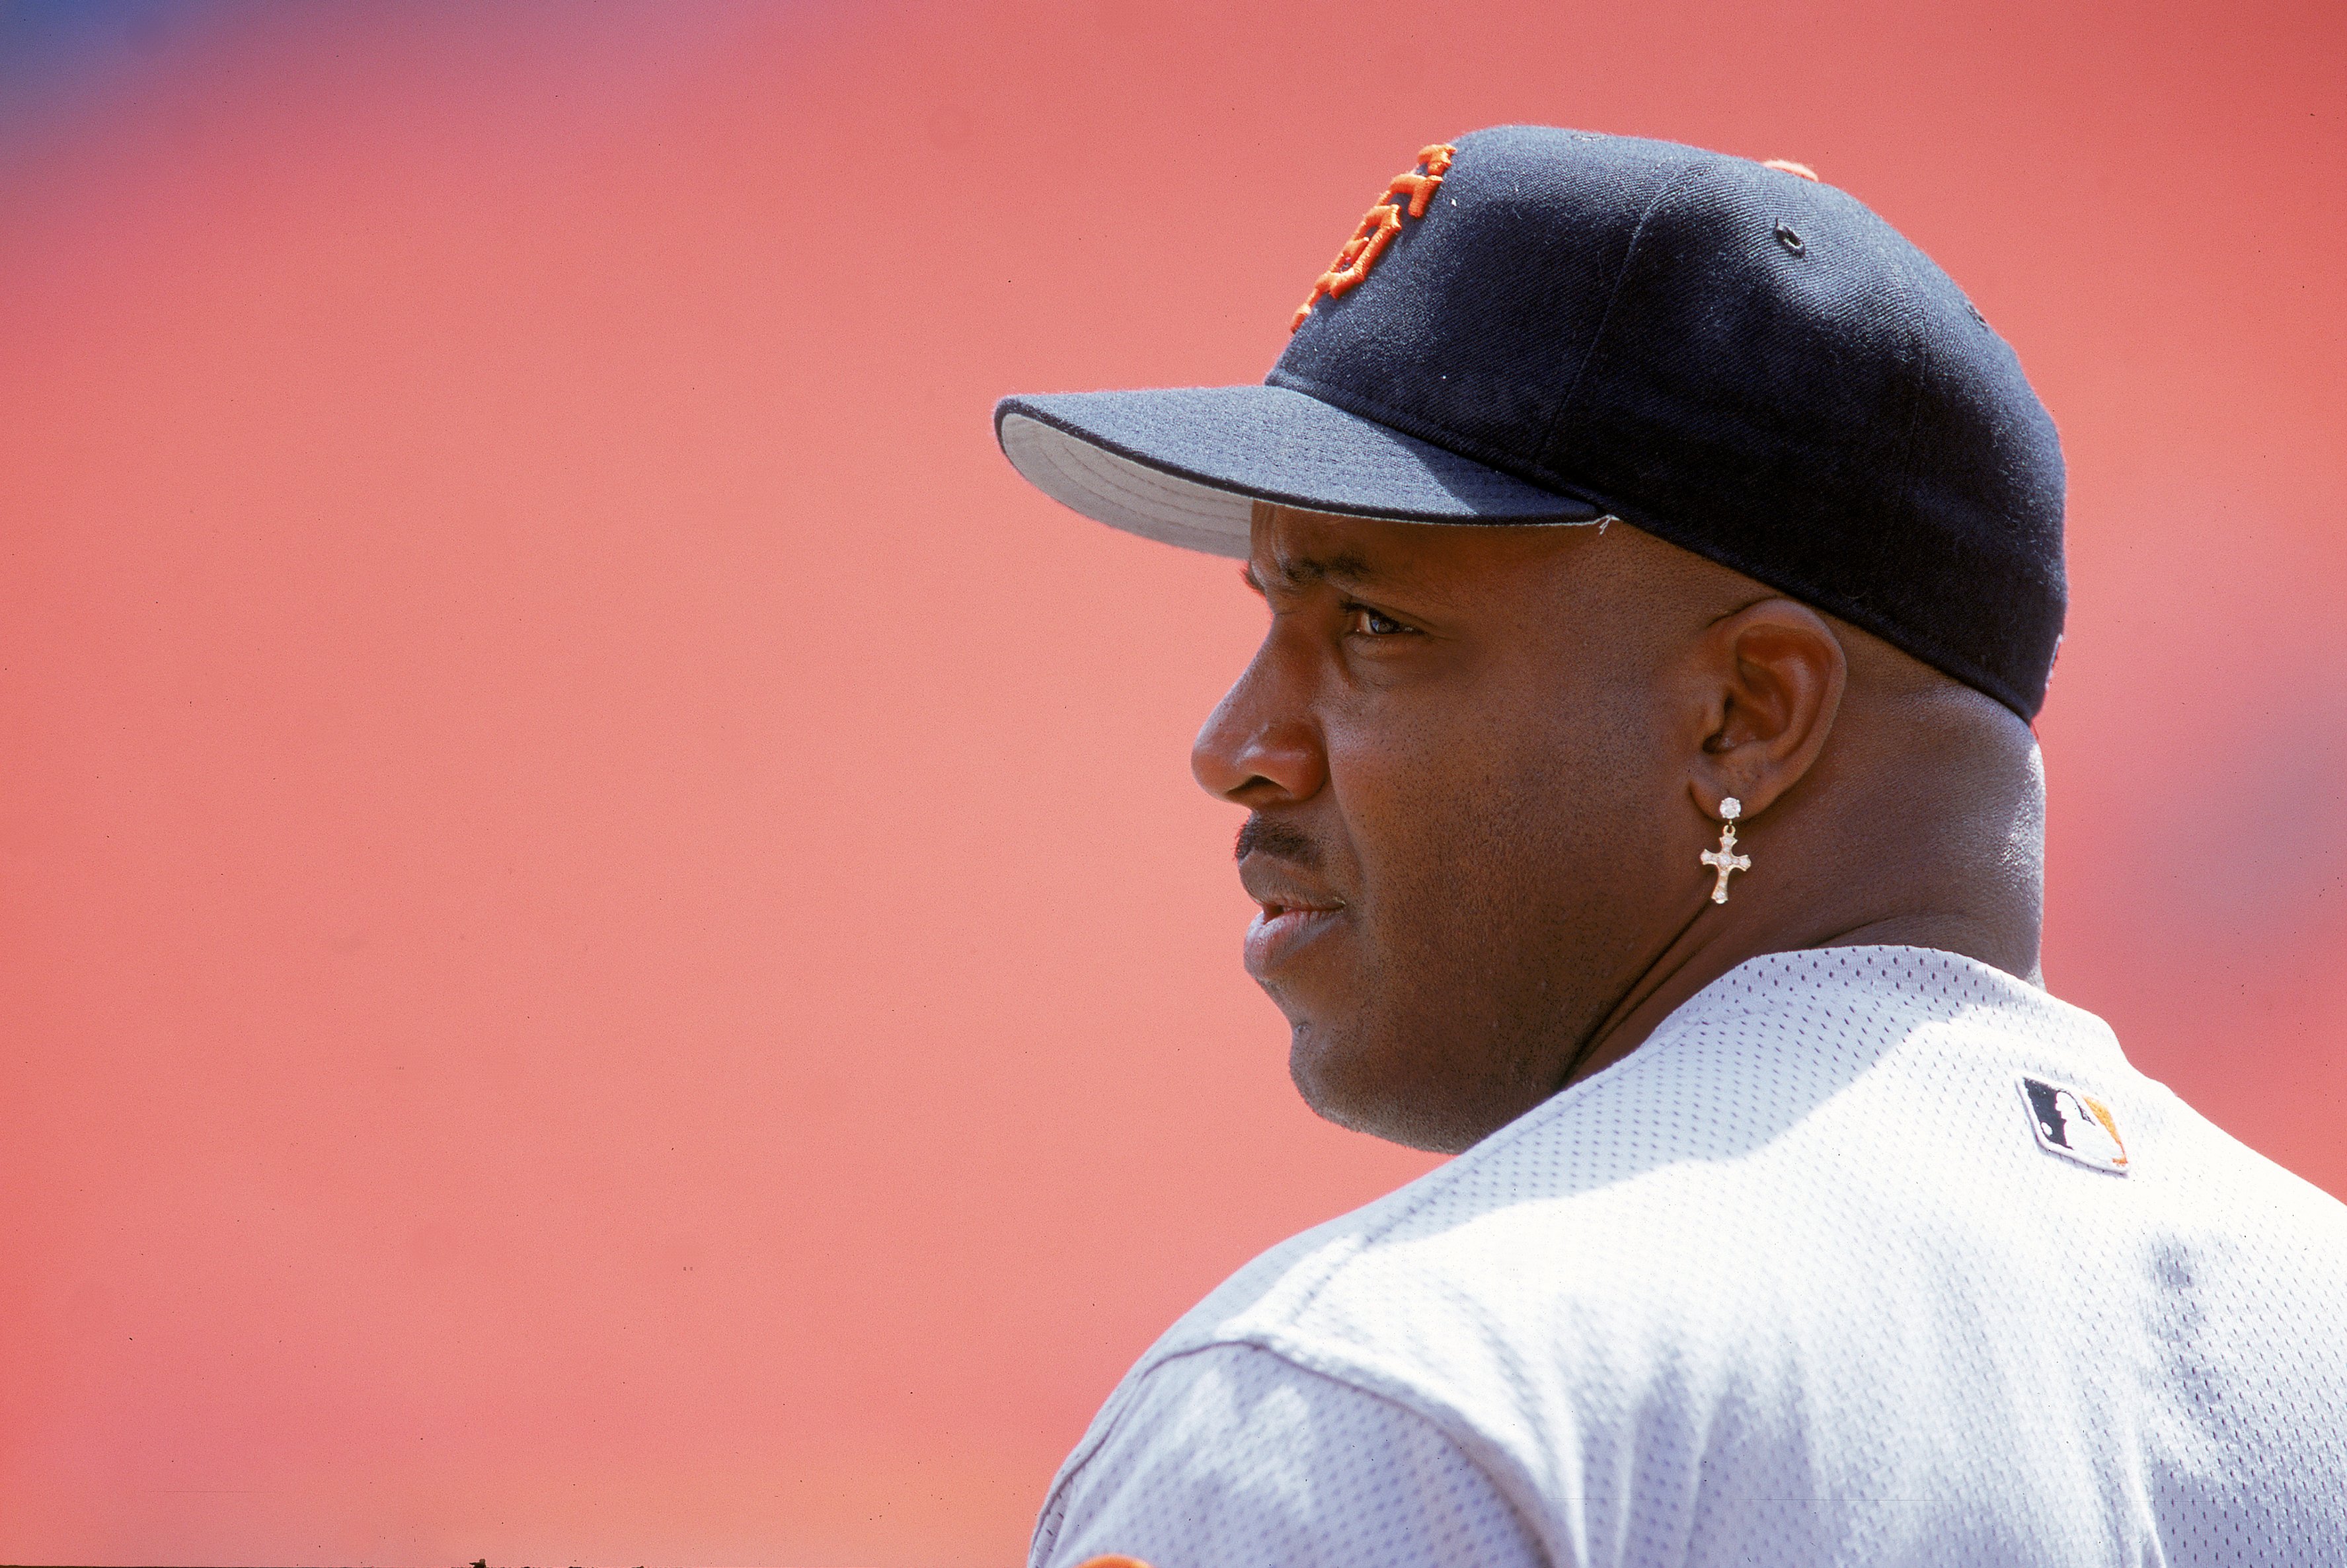 6 Apr 2000: Barry Bonds #25 of the San Francisco Giants looks on the field during the game against the Florida Marlins at the Pro Player Stadium in Miami, Florida. The Marlins defeated the Giants 6-5.